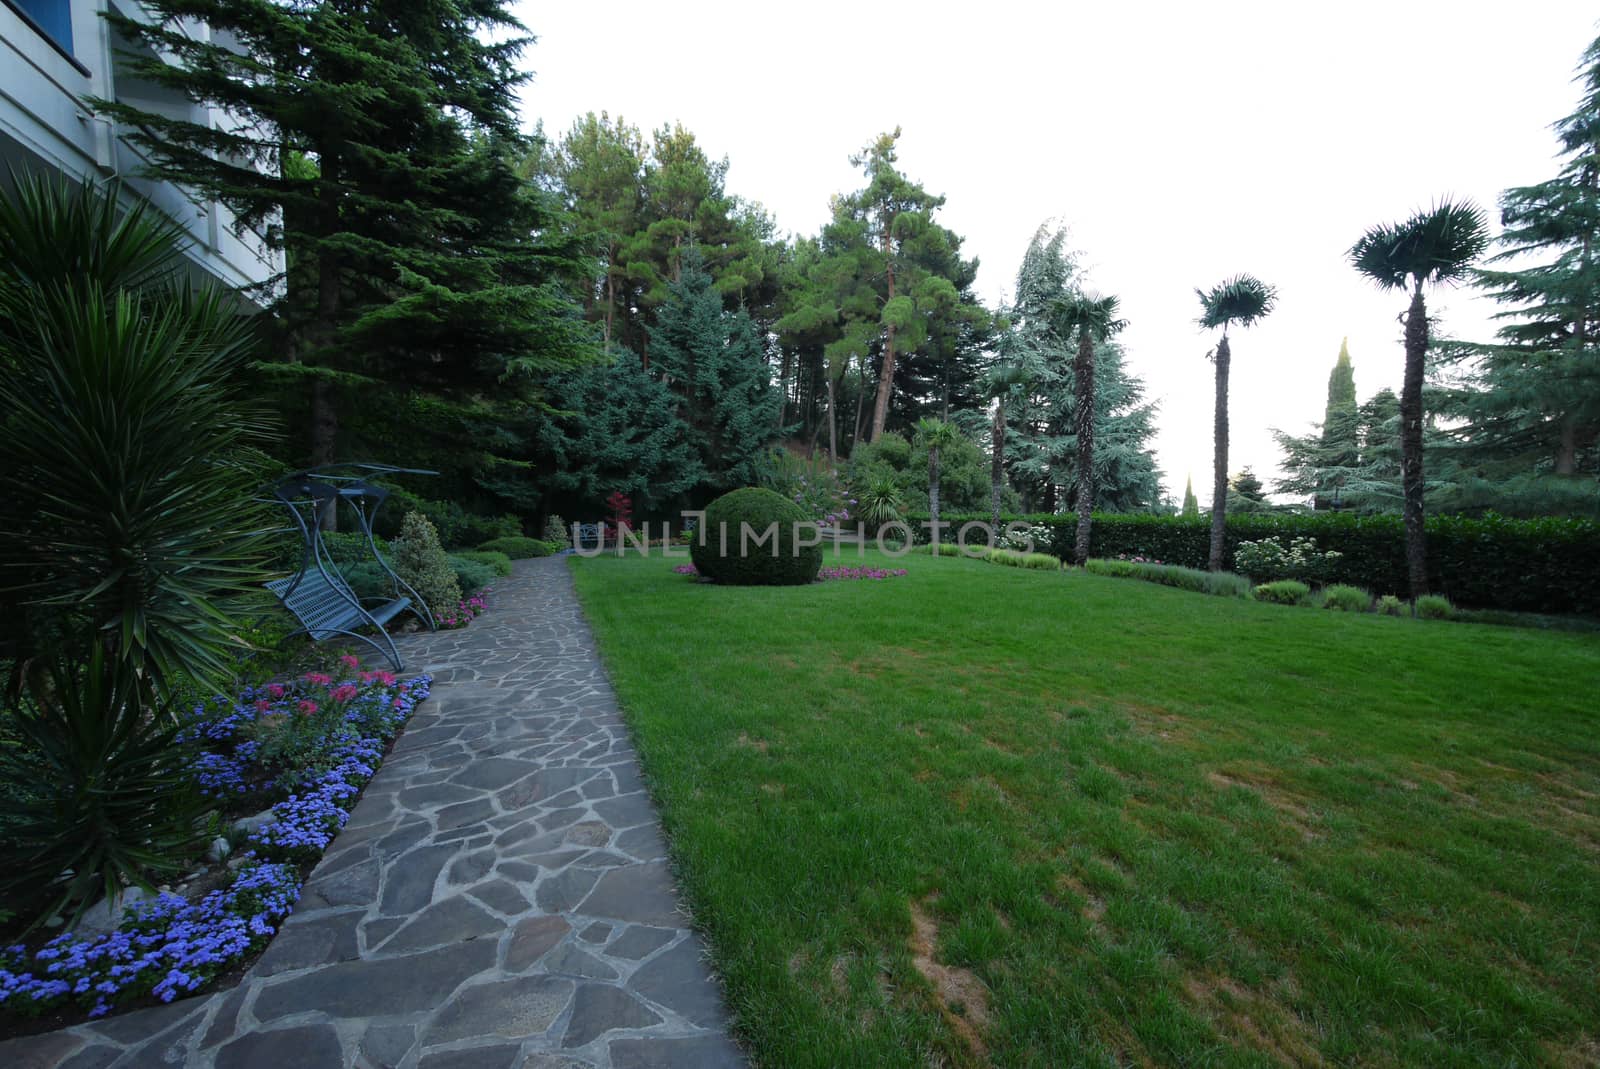 A park with a stone lined path is planted with various ornamental plants under the windows of the house.